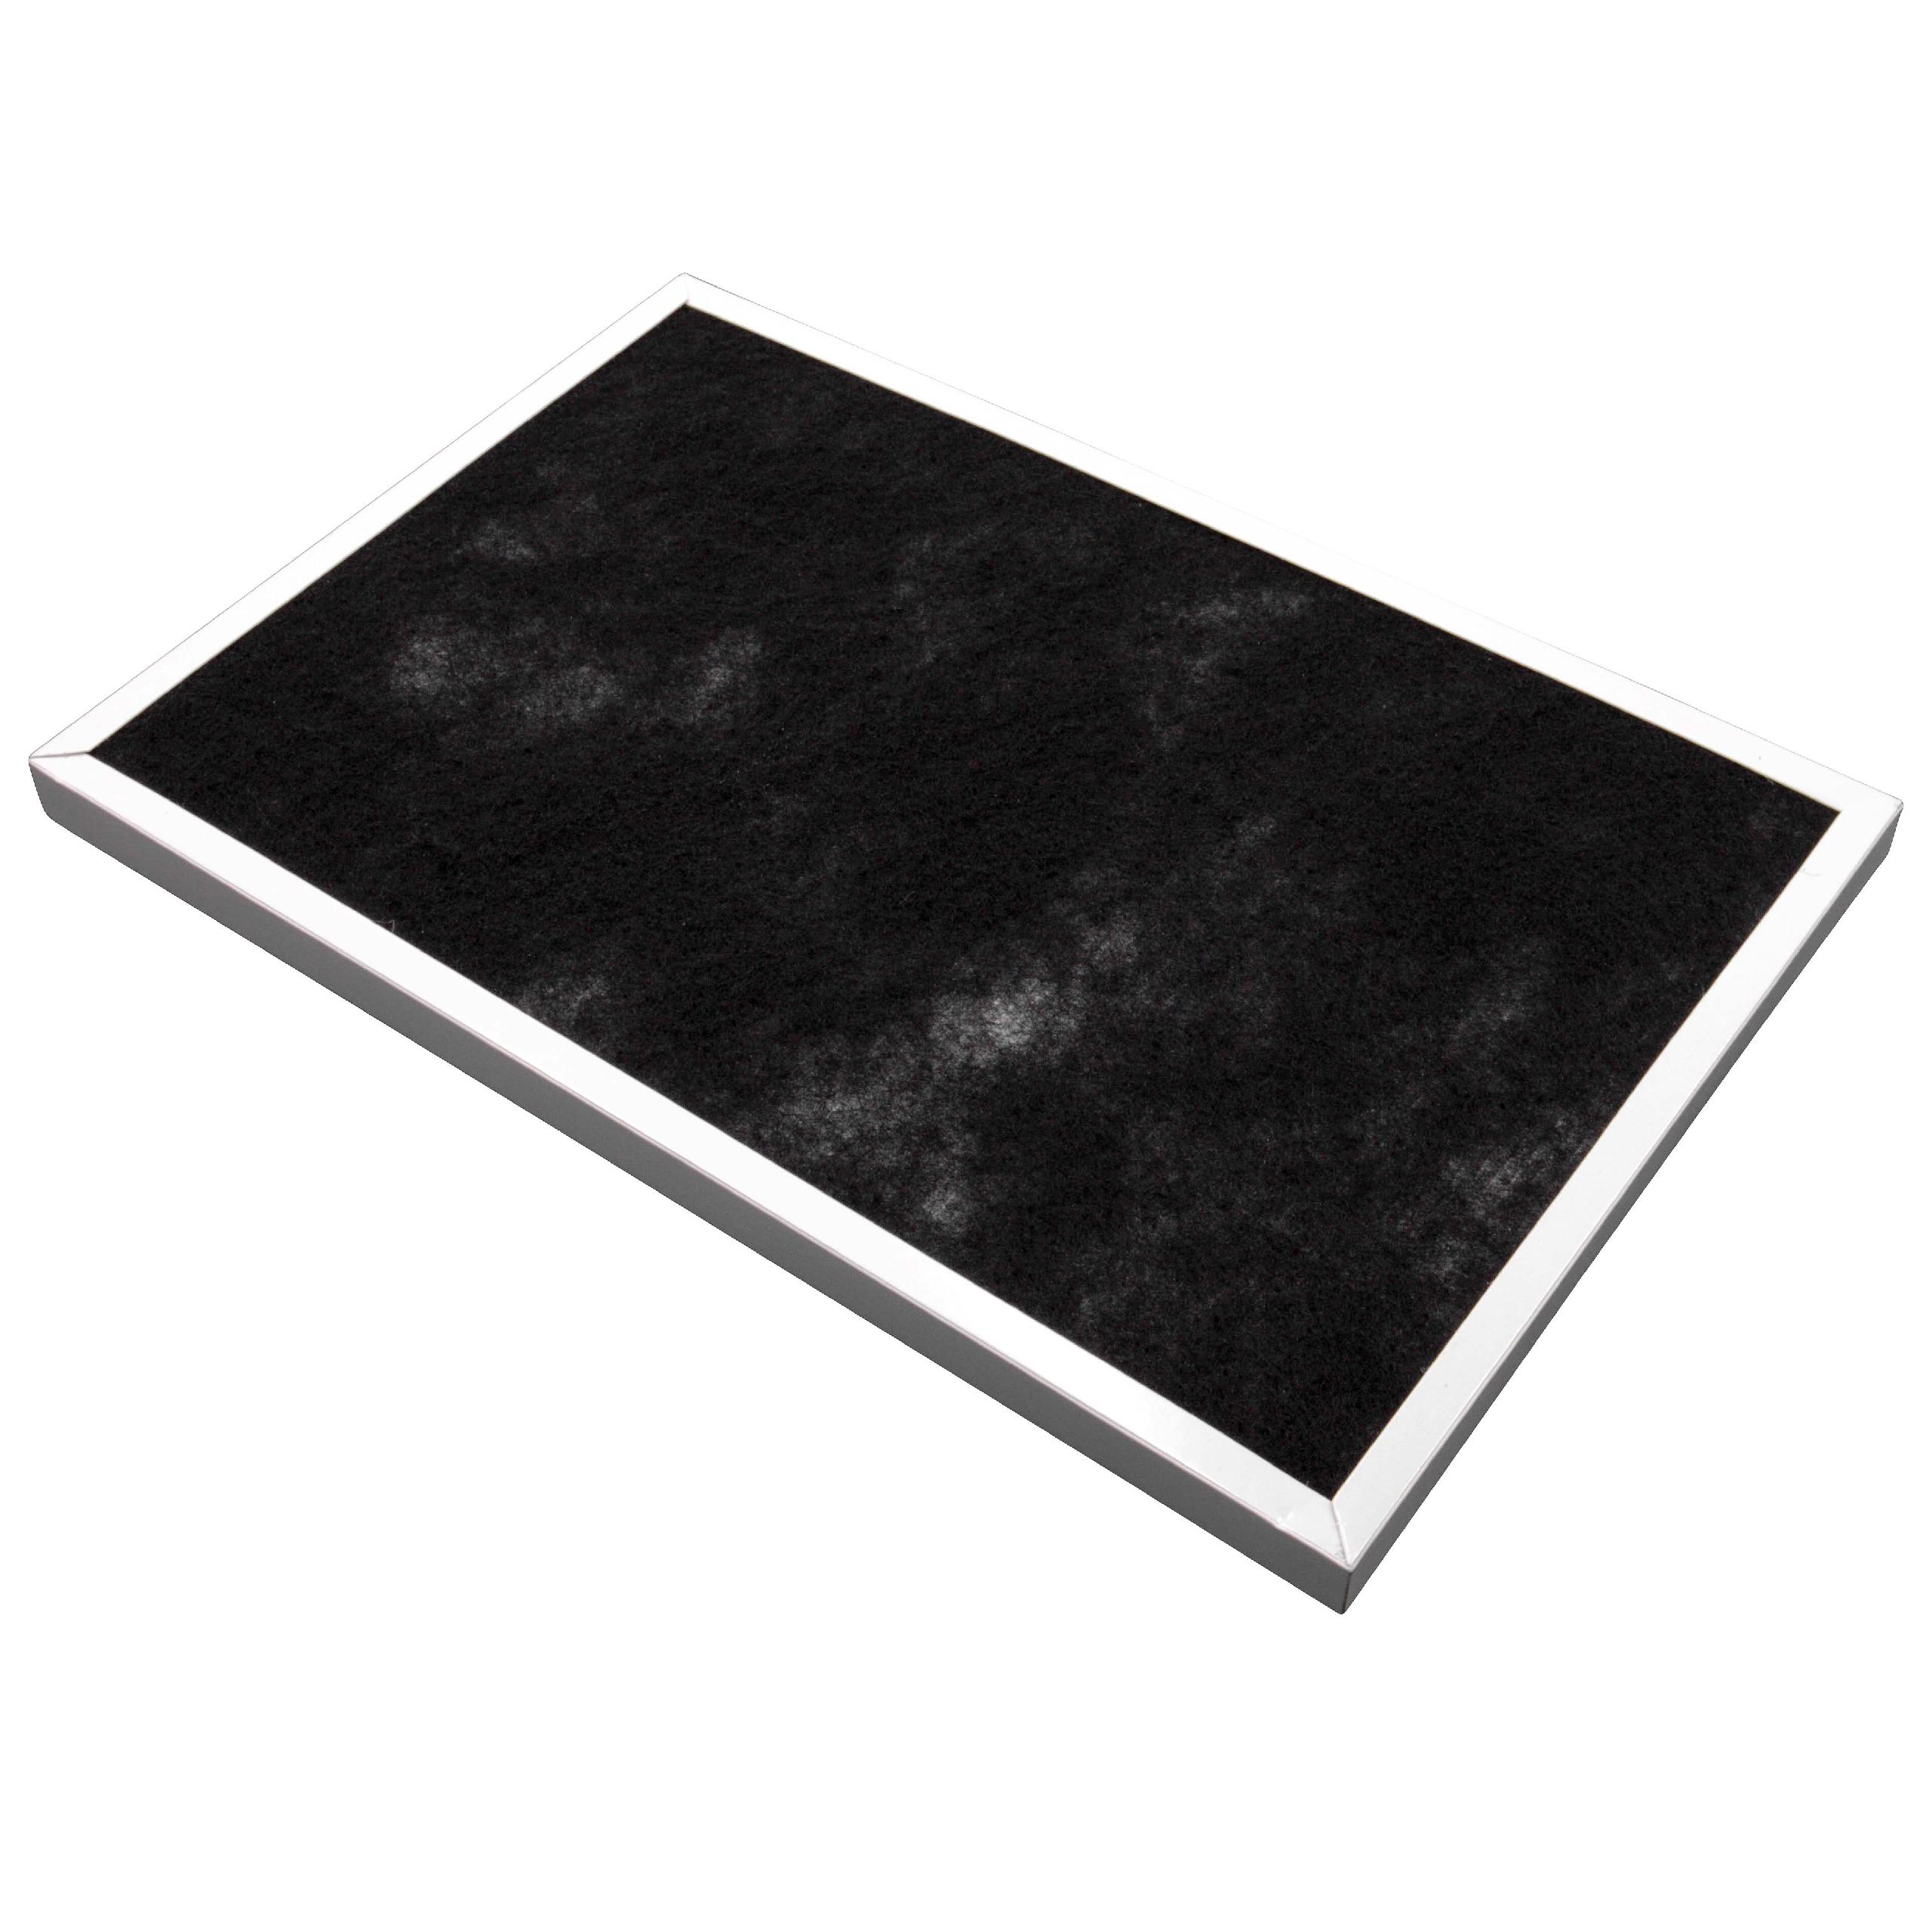 Filter as Replacement for Comedes PT94019 - HEPA + Activated Carbon, 36.6 x 24.1 x 1.9 cm